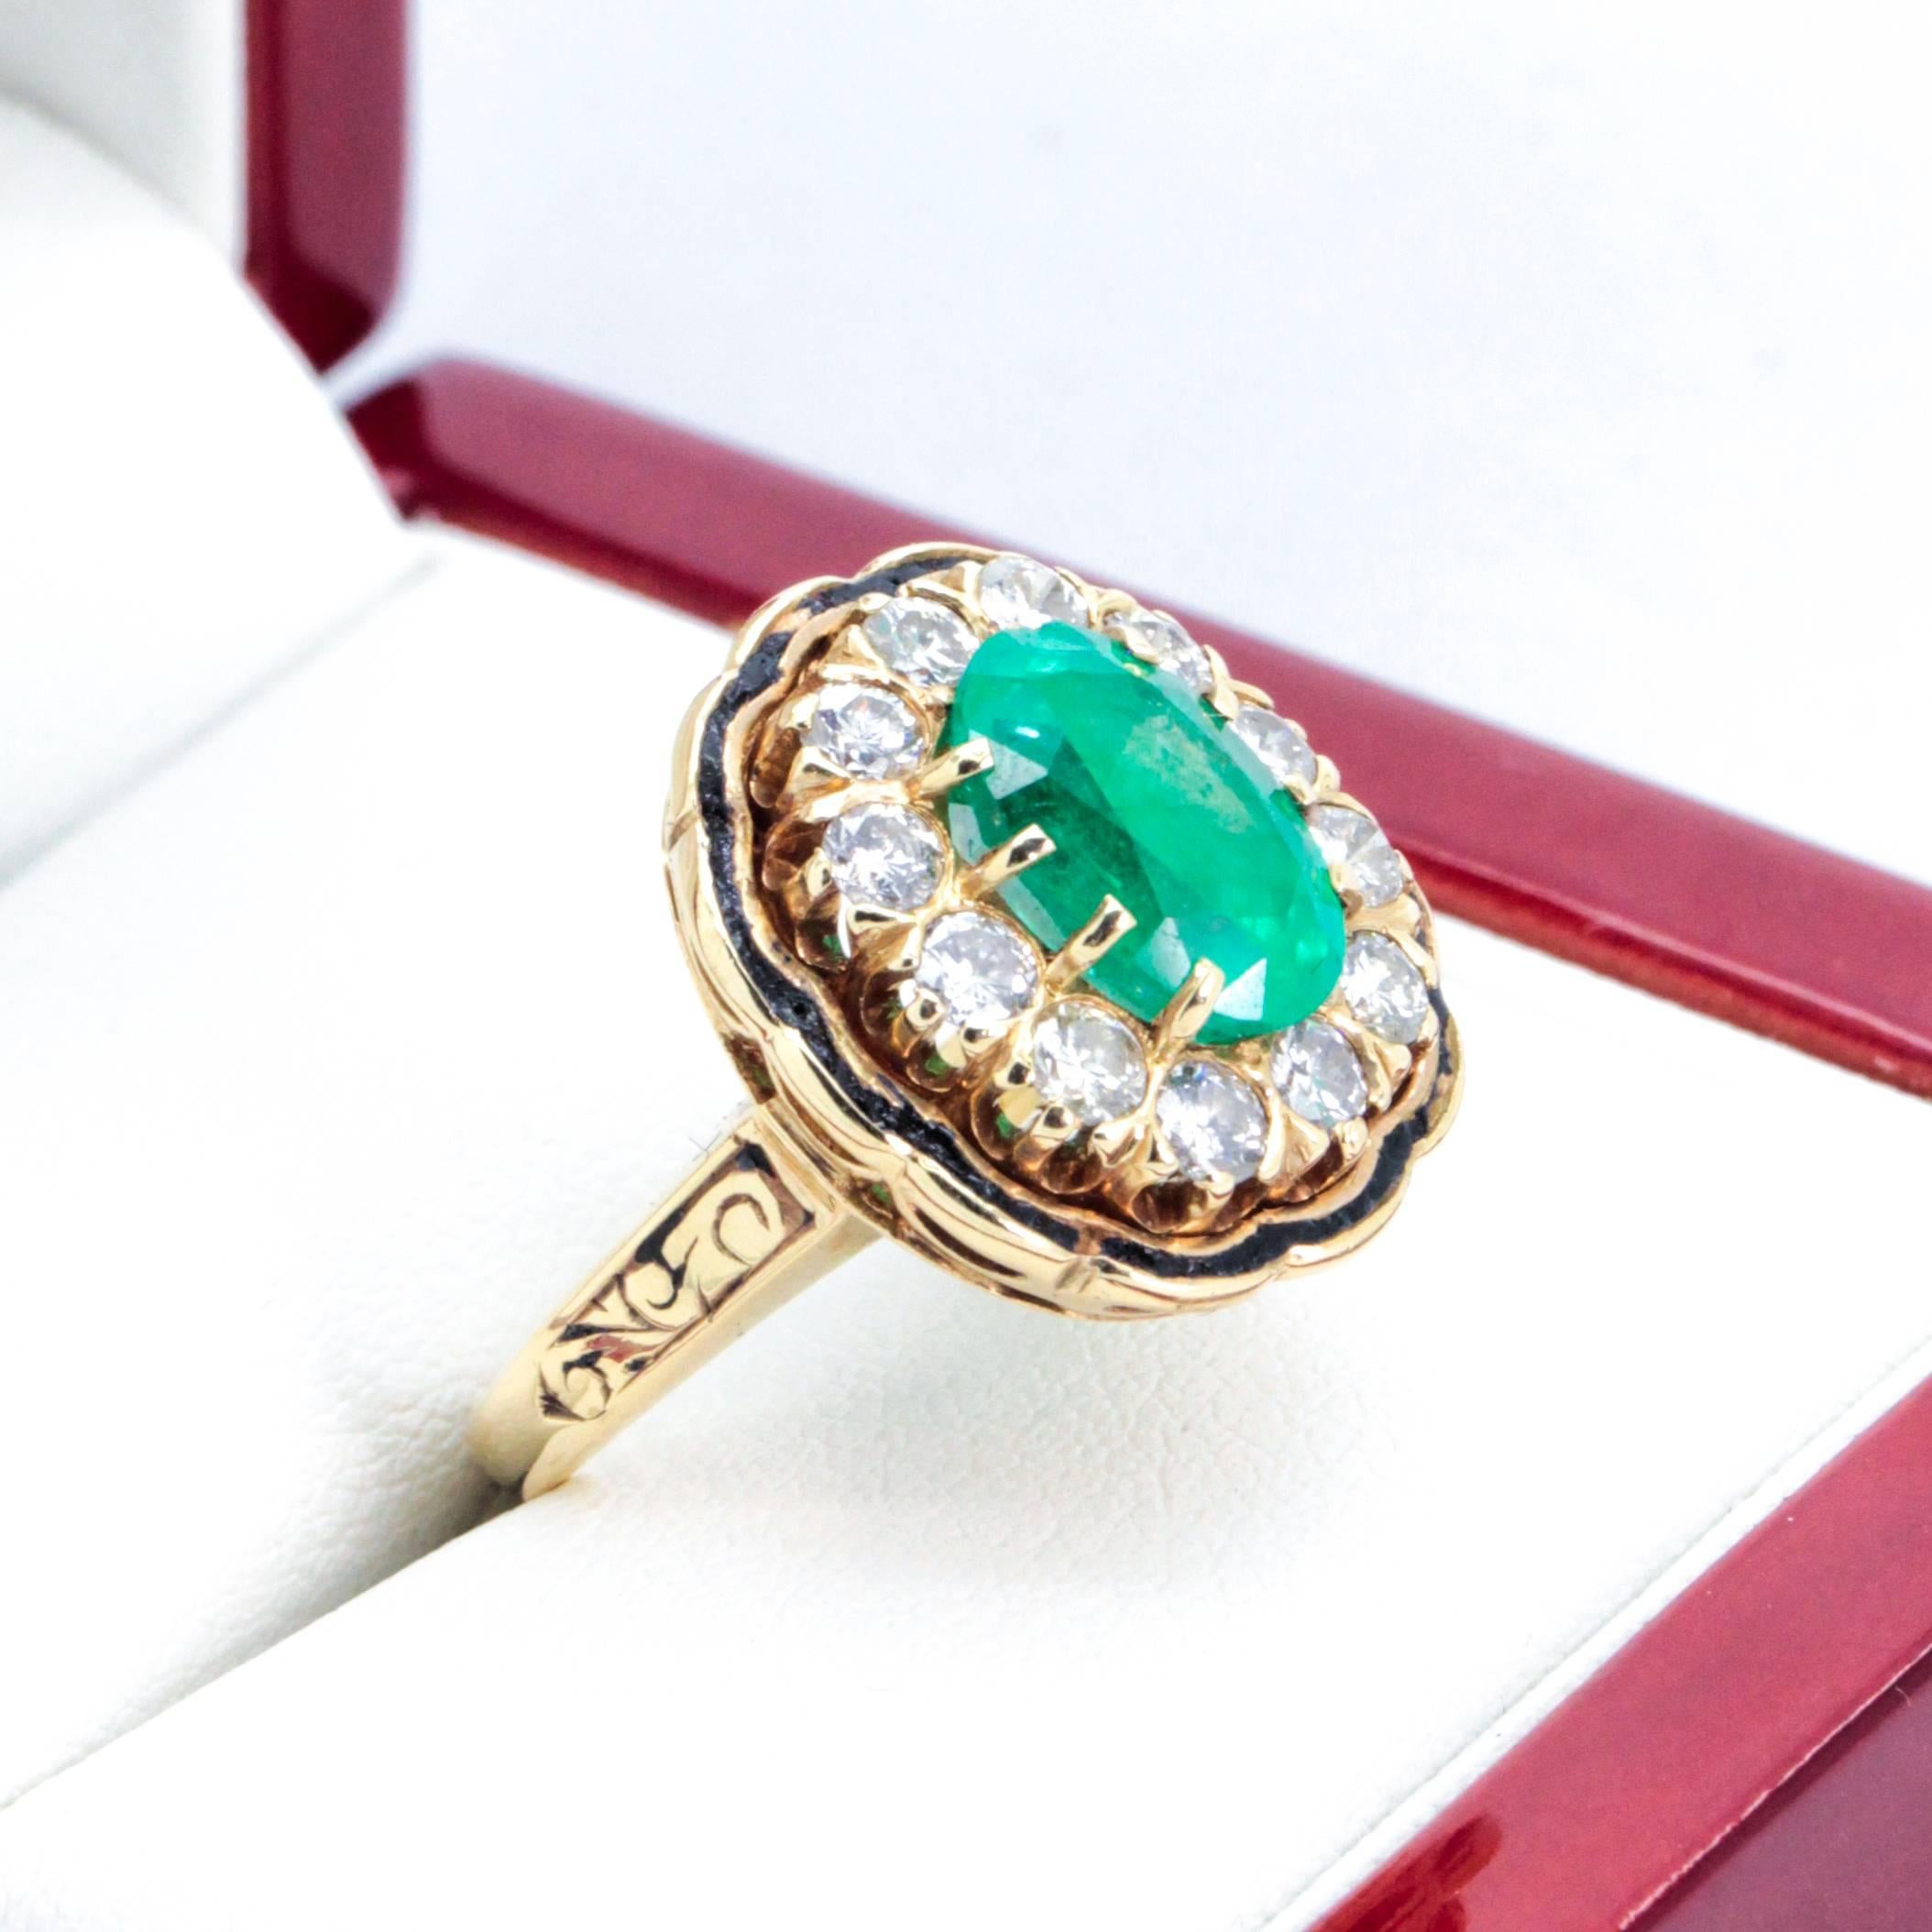 Vintage Emerald and Diamond cluster Cocktail ring with Enamel detail and 12 Diamonds.  

Great ring for either hand this 14ct yellow gold 13 stone Emerald and Diamond cluster ring features an old cut, oval Emerald 8 claw set surrounded by 12 round